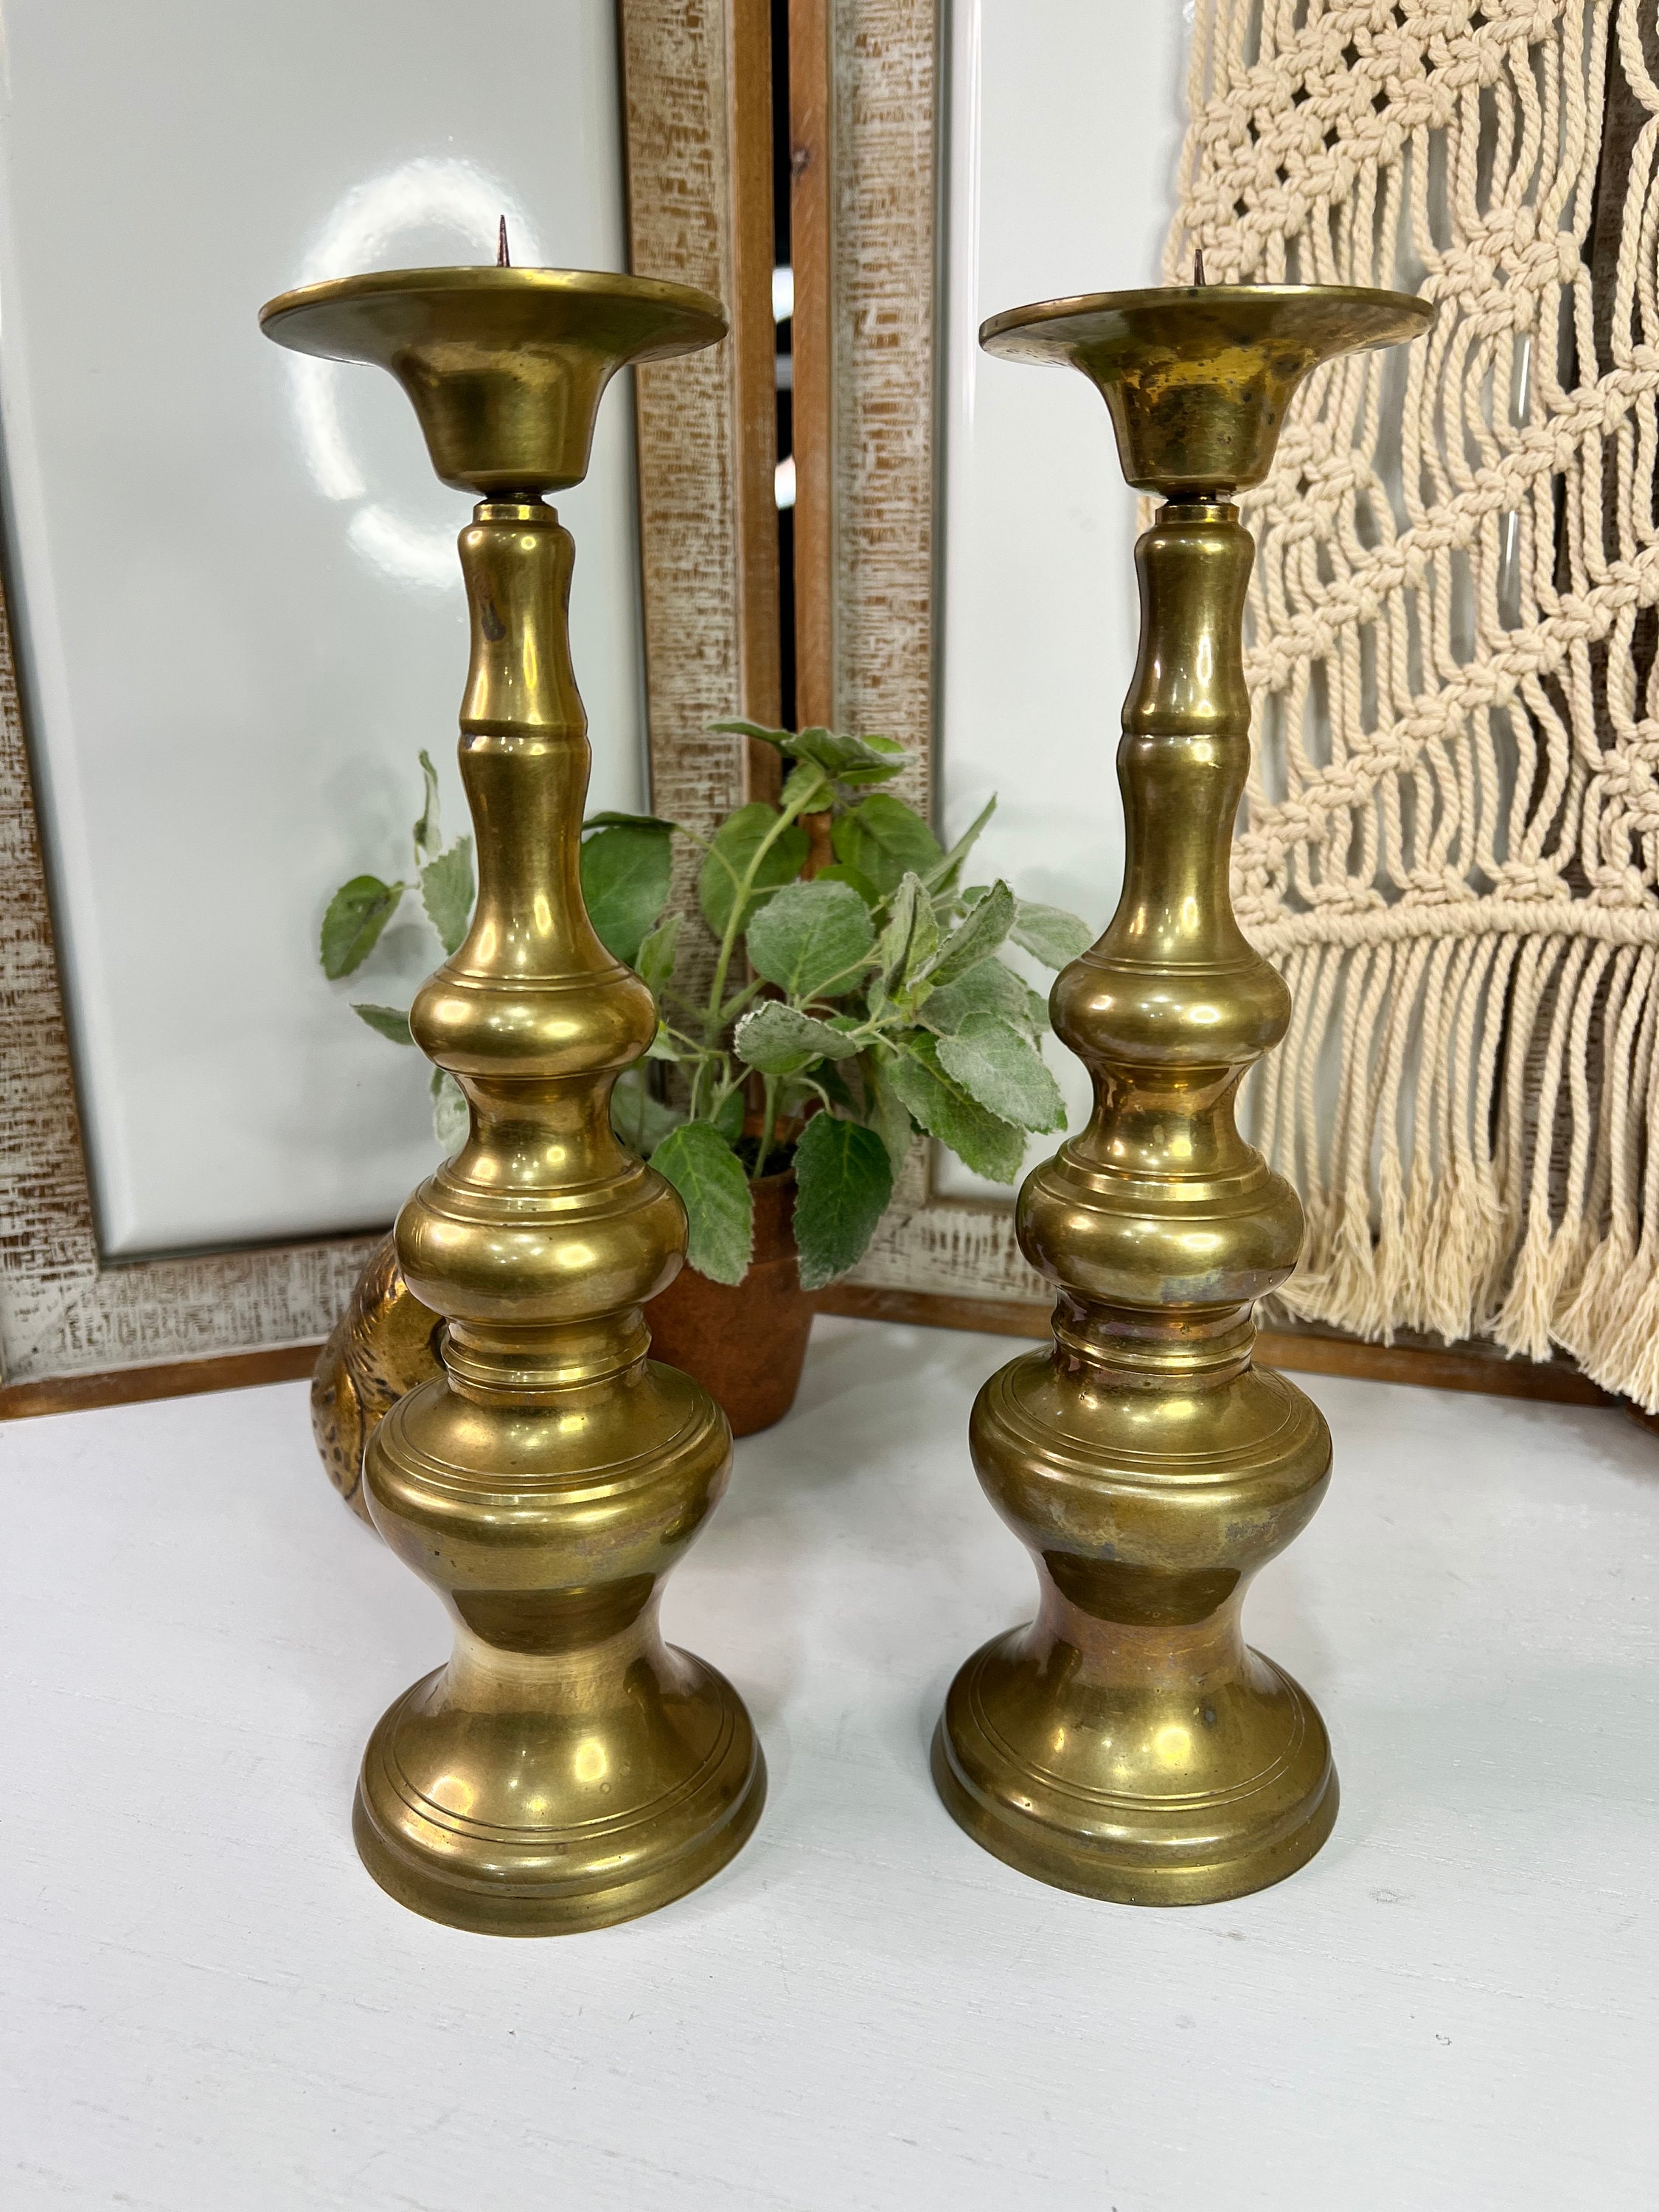 Vintage Large Heavy Solid Brass Candle Holders With Spikes for Tapers,  Votives, Sphere Candles/boho Brass Decor/ 